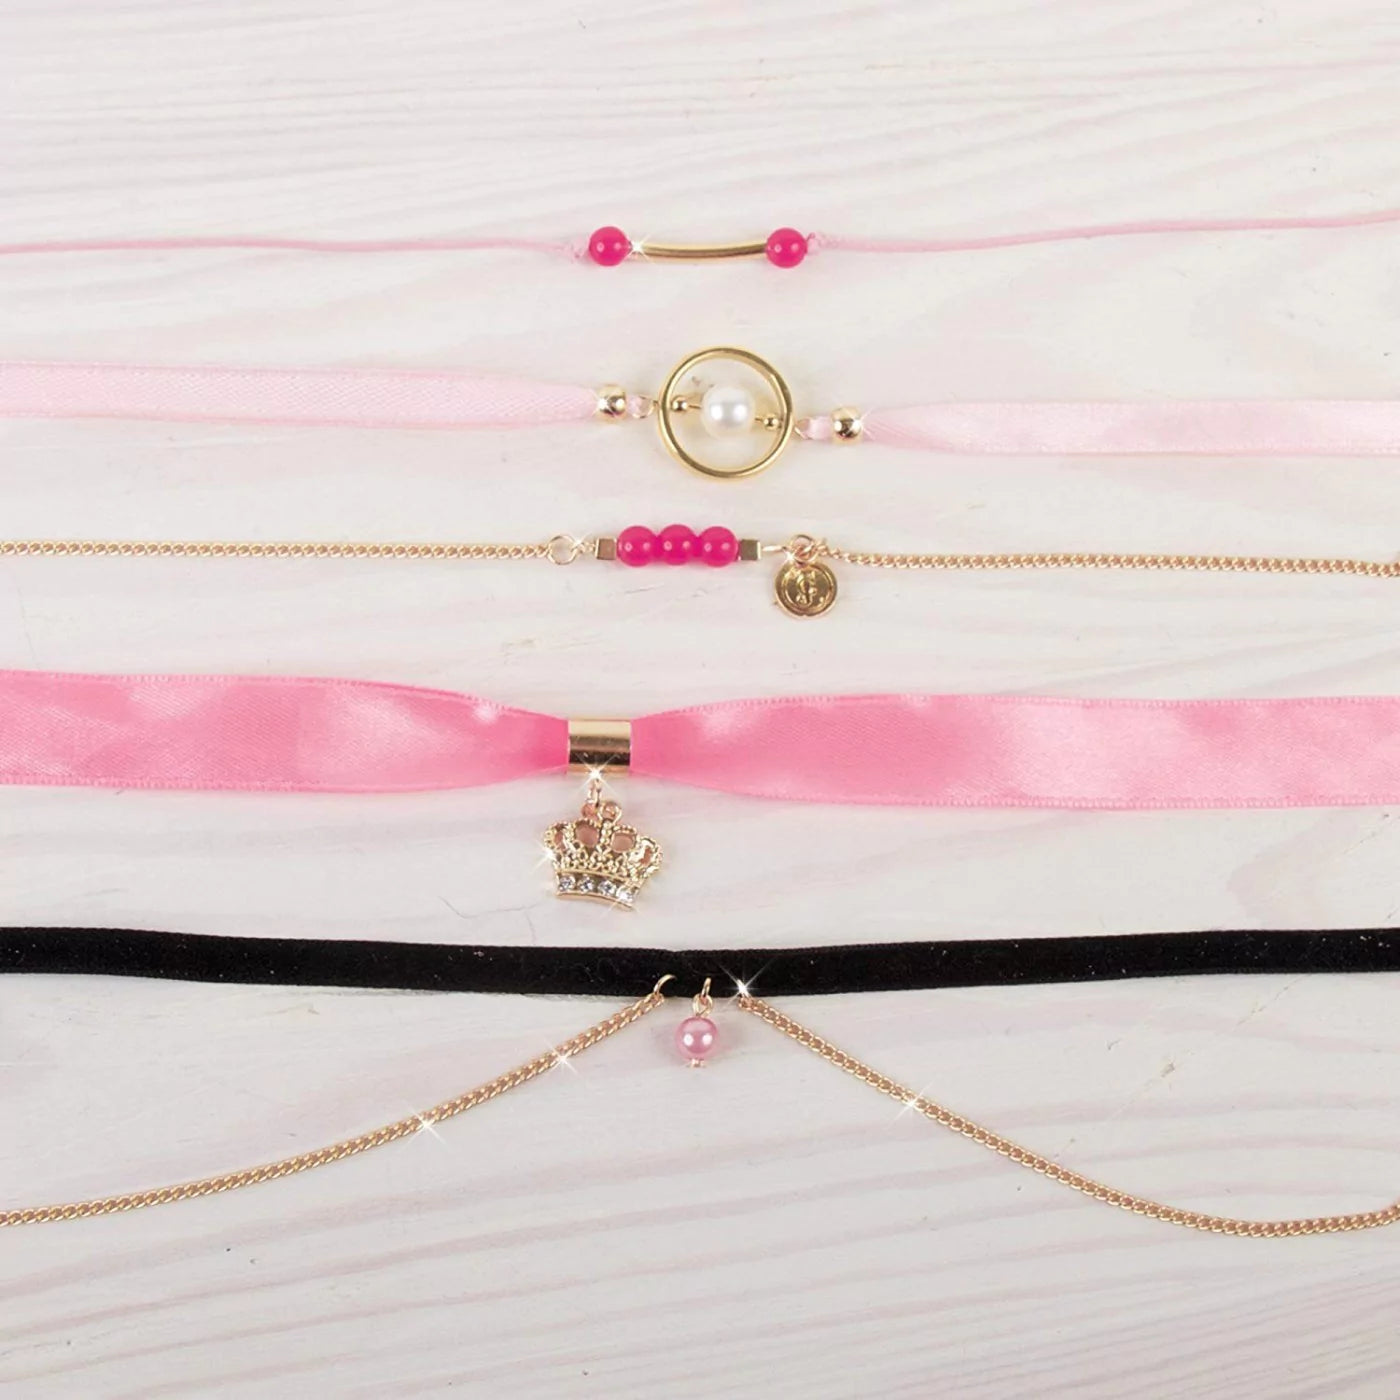 Make It Real Juicy Couture Chokers & Charms